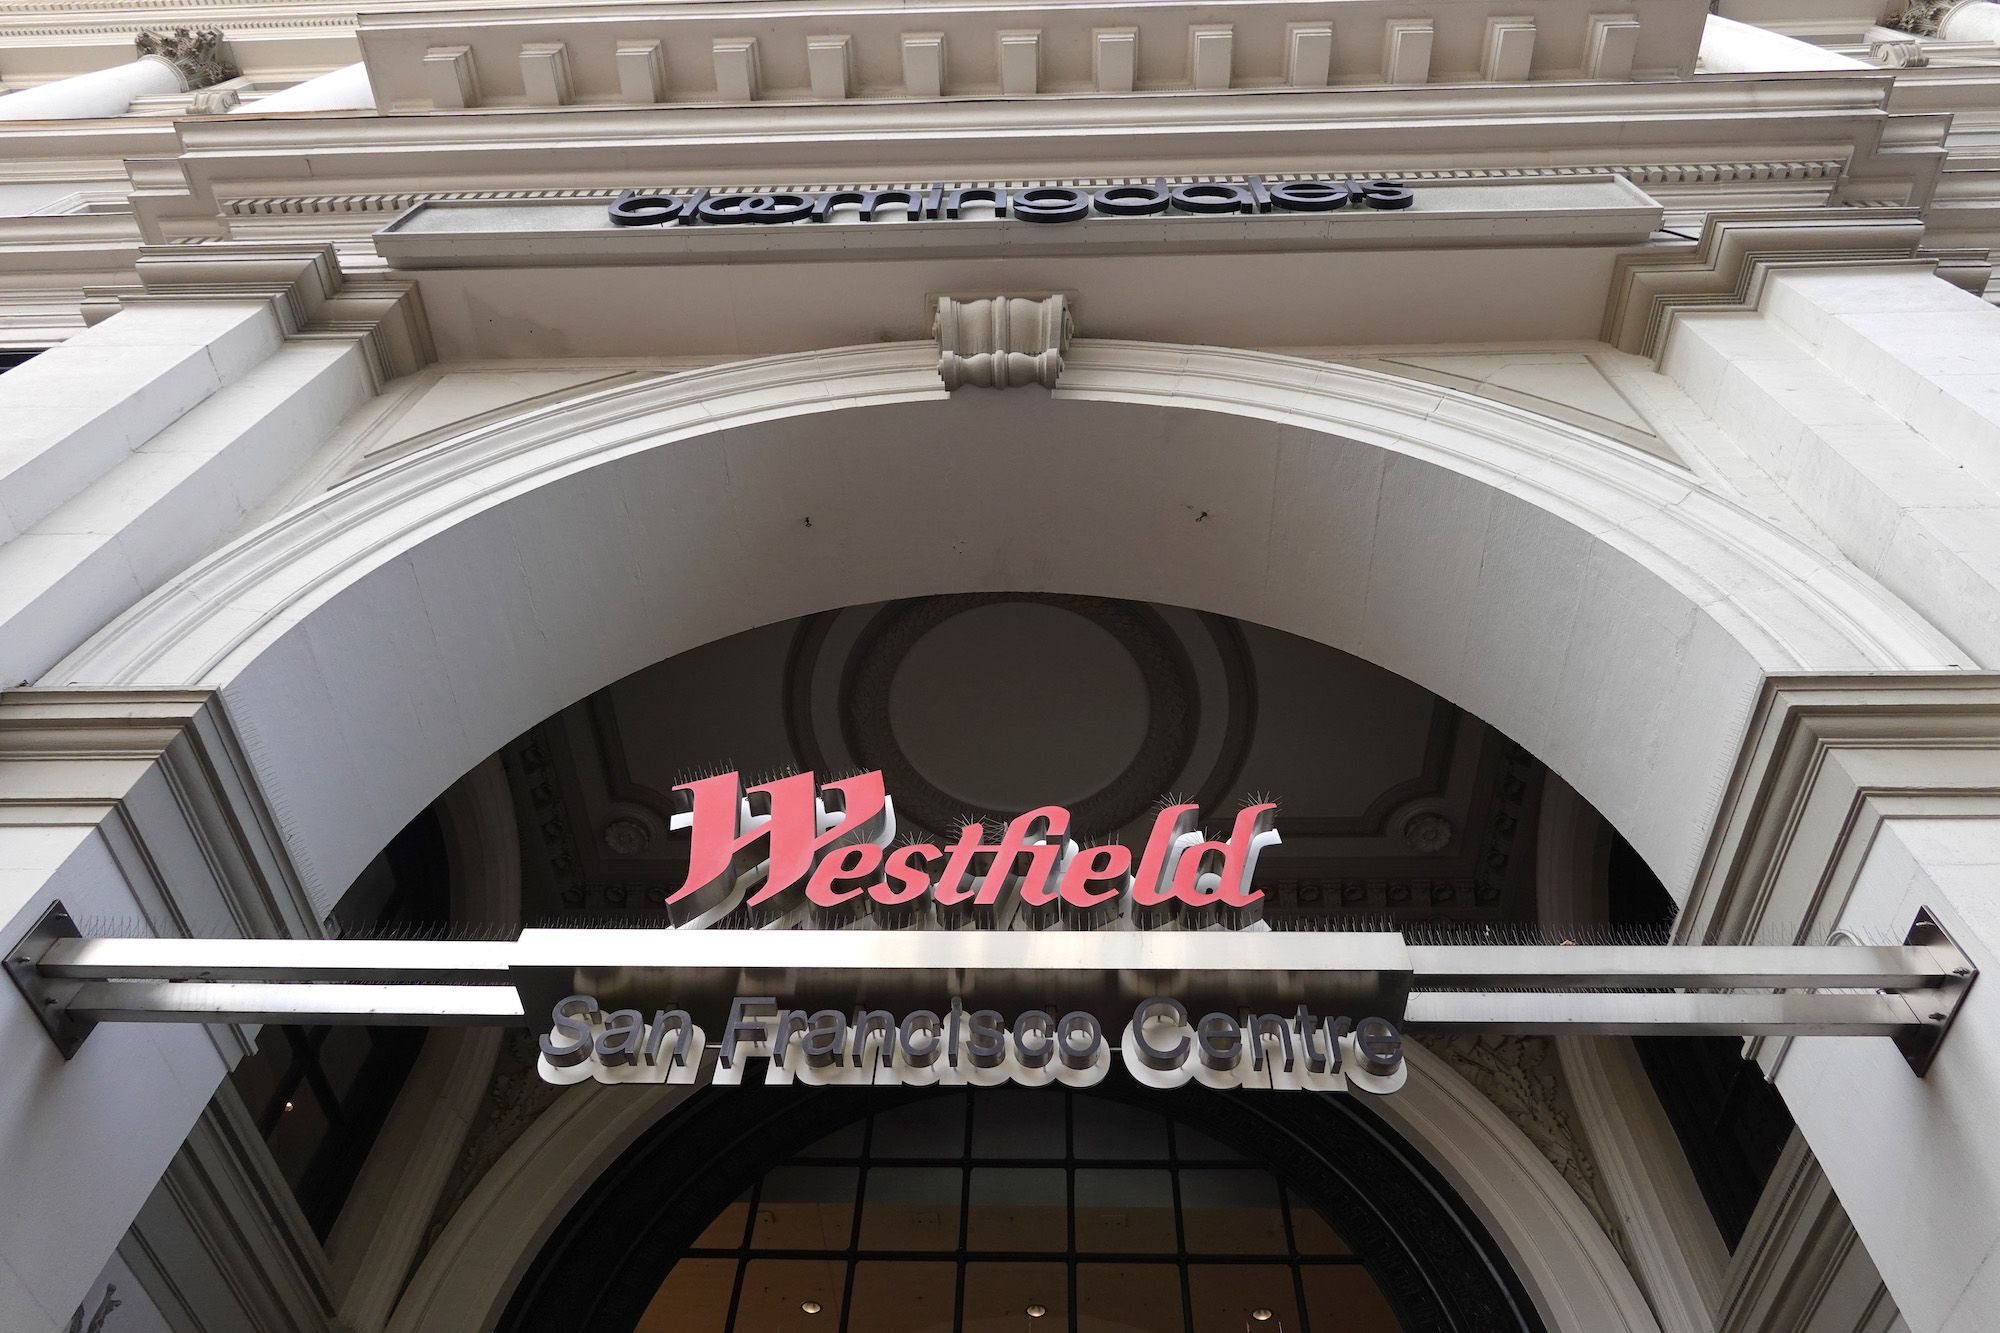 Westfield sign on the facade of an upscale shopping mall Westfield